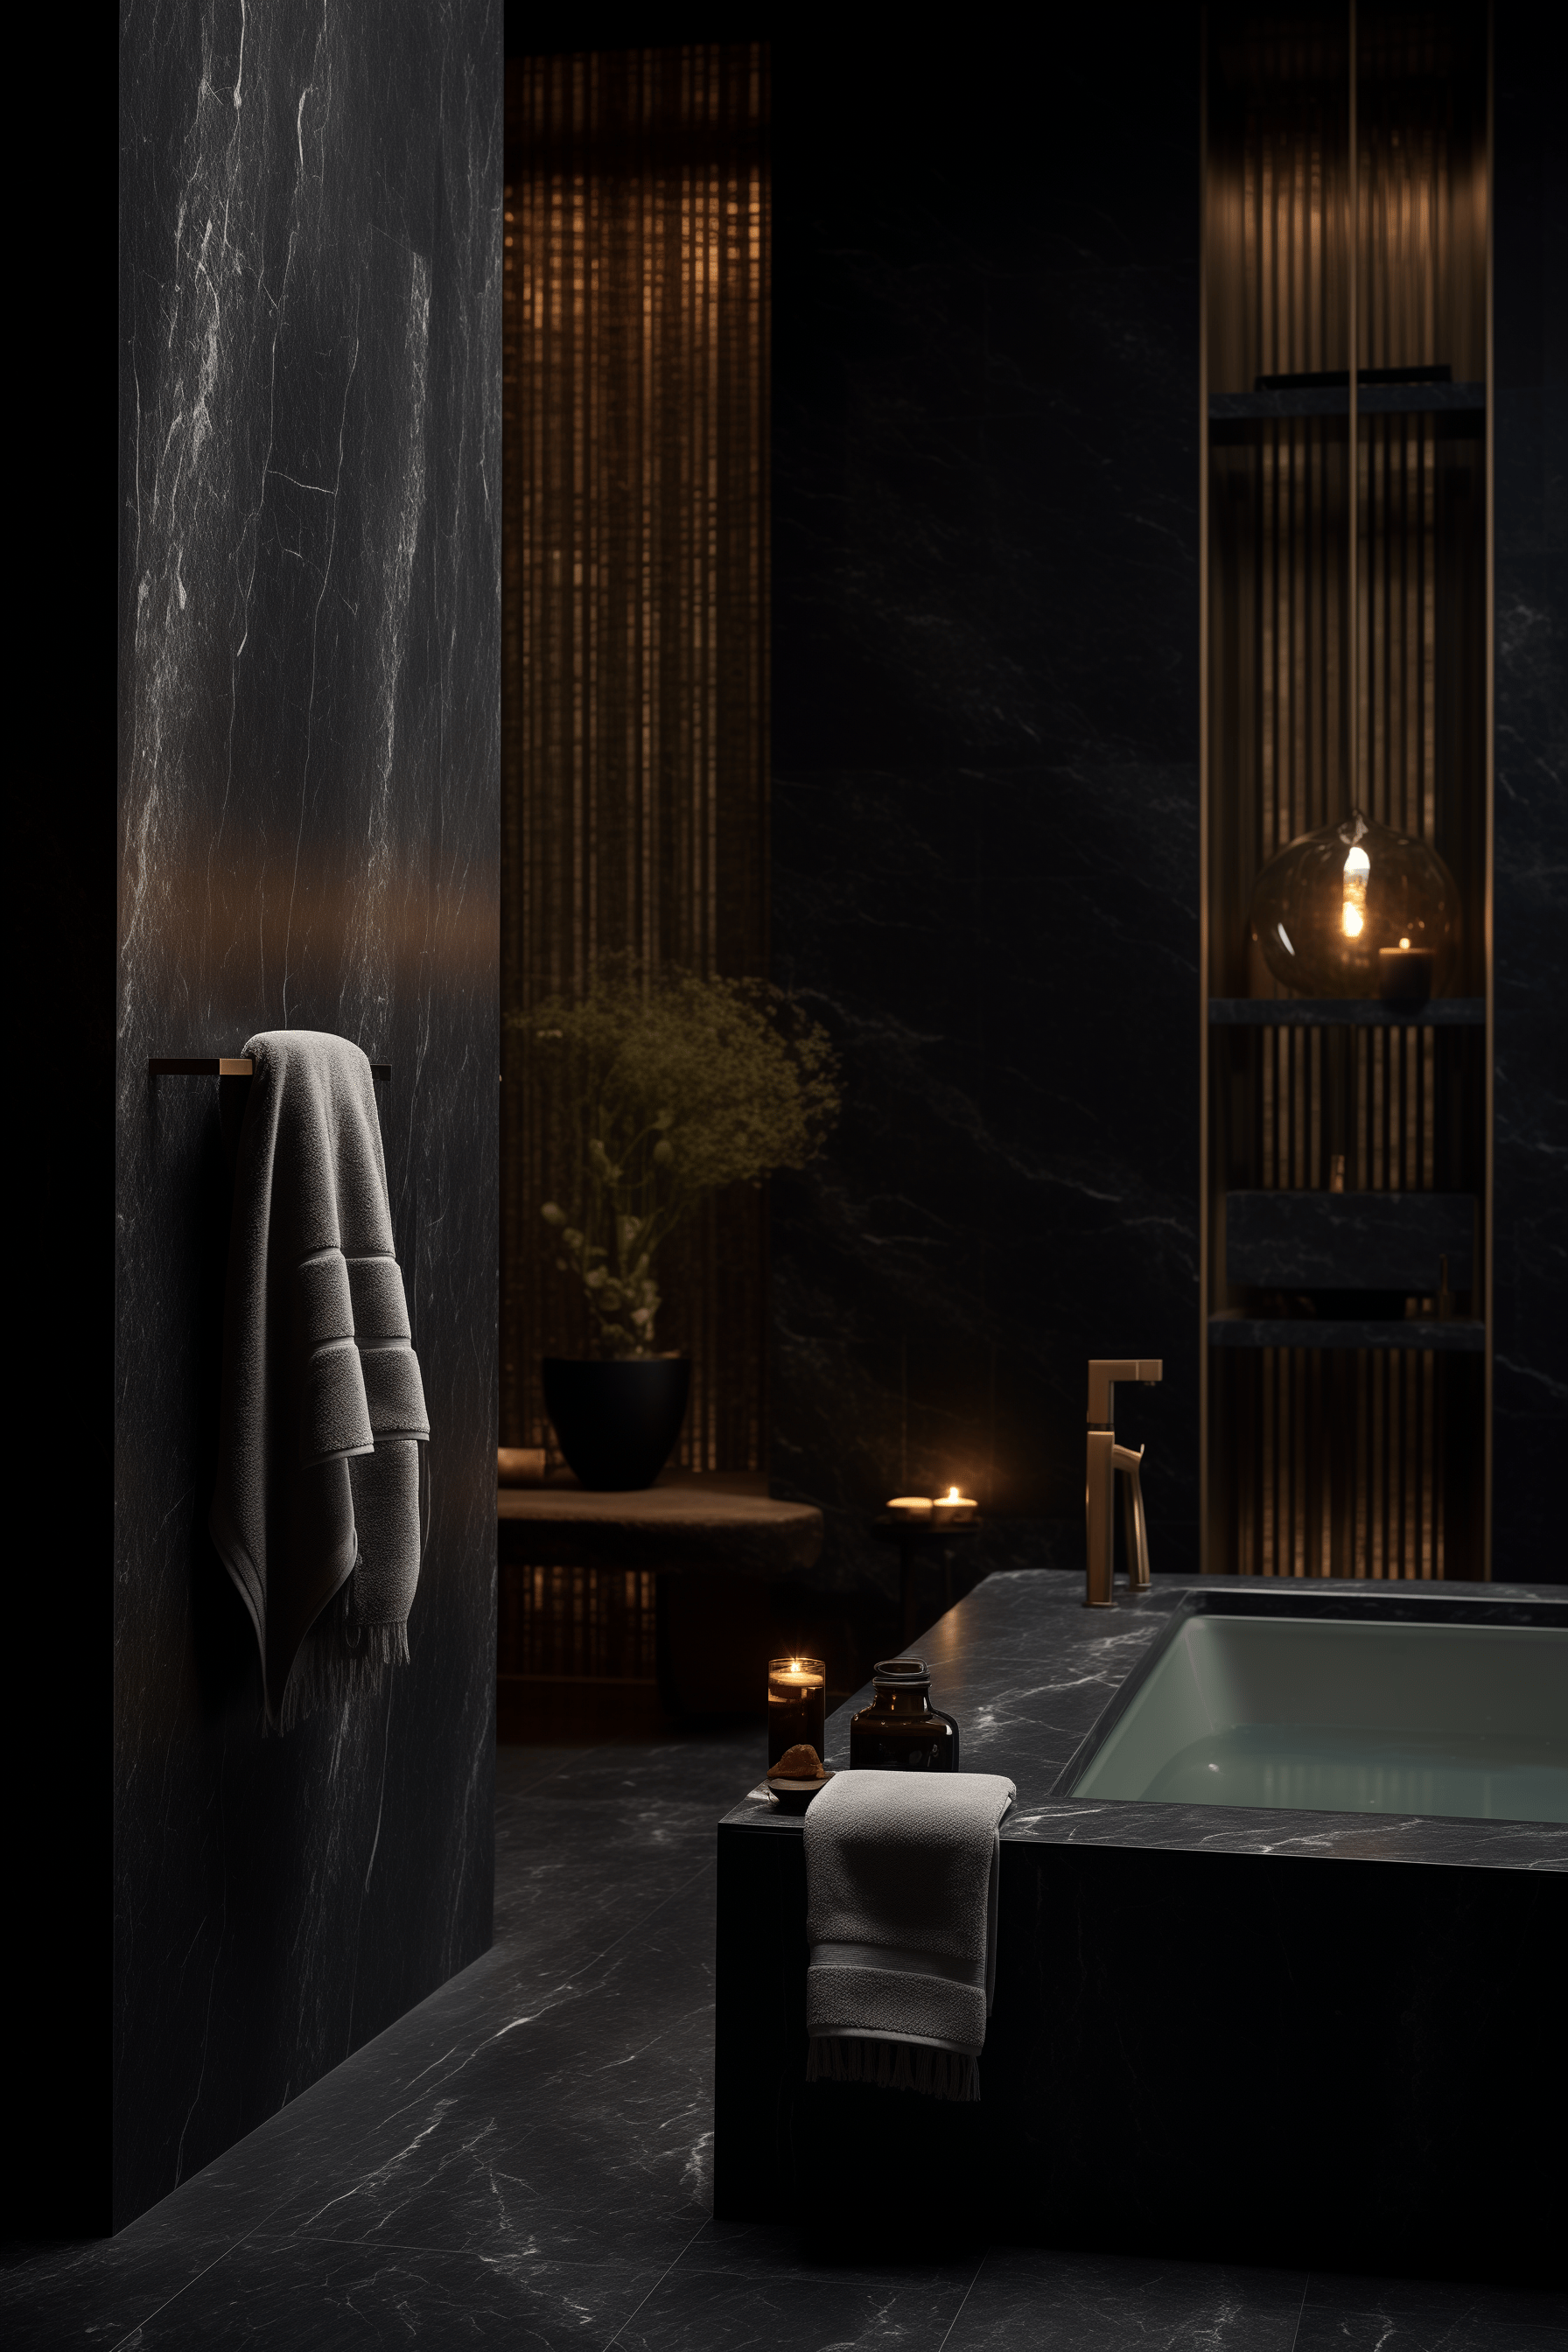 <p>Step into the realm of sophistication and intrigue with these 39 dark bathroom ideas that redefine contemporary design. From matte black fixtures to moody floral wallpapers, these inspirations encompass a spectrum of styles, offering a perfect blend of luxury, modernity, and timeless elegance for your bathroom sanctuary.</p> <p>Here are 39 dark bathroom ideas that you can consider for a bold and stylish design:</p> <h3>Matte Black Fixtures</h3> <p>&nbsp;<img alt="dark bathroom aesthetic decor design ideas luxury cozy colors" src="https://cdn.shopify.com/s/files/1/0411/1951/4782/files/dark_bathroom_aesthetic_2.png?v=1703151507" data-mce-src="https://cdn.shopify.com/s/files/1/0411/1951/4782/files/dark_bathroom_aesthetic_2.png?v=1703151507" data-mce-fragment="1"></p> <p>Use matte black faucets, shower heads, and towel bars for a sleek look.</p> <h3>Charcoal Gray Walls</h3> <p>&nbsp;<img alt="dark bathroom aesthetic decor design ideas luxury cozy colors" src="https://cdn.shopify.com/s/files/1/0411/1951/4782/files/cozy_dark_bathroom.png?v=1703151526" data-mce-src="https://cdn.shopify.com/s/files/1/0411/1951/4782/files/cozy_dark_bathroom.png?v=1703151526" data-mce-fragment="1"></p> <p>Paint the walls in a deep charcoal gray for a moody atmosphere.</p> <h3>Black Subway Tiles</h3> <p>&nbsp;<img alt="dark bathroom aesthetic decor design ideas luxury cozy colors" src="https://cdn.shopify.com/s/files/1/0411/1951/4782/files/dark_bathroom_aesthetic_decor_design_ideas_luxury_cozy_colors_2.png?v=1703151541" data-mce-src="https://cdn.shopify.com/s/files/1/0411/1951/4782/files/dark_bathroom_aesthetic_decor_design_ideas_luxury_cozy_colors_2.png?v=1703151541" data-mce-fragment="1"></p> <p>Install black subway tiles for a modern and sophisticated feel.</p> <h3>Dark Wood Accents</h3> <p>&nbsp;<img alt="dark bathroom aesthetic decor design ideas luxury cozy colors" src="https://cdn.shopify.com/s/files/1/0411/1951/4782/files/cozy_dark_bathroom_2.png?v=1703151555" data-mce-src="https://cdn.shopify.com/s/files/1/0411/1951/4782/files/cozy_dark_bathroom_2.png?v=1703151555" data-mce-fragment="1"></p> <p>Incorporate dark wood elements for warmth and contrast.</p> <h3>Black Hexagon Floor Tiles</h3> <p><img alt="dark bathroom aesthetic decor design ideas luxury cozy colors" src="https://cdn.shopify.com/s/files/1/0411/1951/4782/files/dark_bathroom_aesthetic_decor_design_ideas_luxury_cozy_colors_3.png?v=1703151570" data-mce-src="https://cdn.shopify.com/s/files/1/0411/1951/4782/files/dark_bathroom_aesthetic_decor_design_ideas_luxury_cozy_colors_3.png?v=1703151570" data-mce-fragment="1">&nbsp;</p> <p>Choose black hexagon tiles for a unique and visually interesting floor.</p> <h3>Black and White Contrast</h3> <p><img src="https://cdn.shopify.com/s/files/1/0411/1951/4782/files/dark_bathroom_aesthetic_decor_design_ideas_luxury_cozy_colors_5.png?v=1703151599" alt="dark bathroom aesthetic decor design ideas luxury cozy colors" data-mce-src="https://cdn.shopify.com/s/files/1/0411/1951/4782/files/dark_bathroom_aesthetic_decor_design_ideas_luxury_cozy_colors_5.png?v=1703151599"></p> <p>Combine black elements with white to create a striking contrast.</p> <h3>Dark Floral Wallpaper</h3> <p><img alt="dark bathroom aesthetic decor design ideas luxury cozy colors" src="https://cdn.shopify.com/s/files/1/0411/1951/4782/files/dark_bathroom_aesthetic_decor_design_ideas_luxury_cozy_colors_7.png?v=1703151616" data-mce-src="https://cdn.shopify.com/s/files/1/0411/1951/4782/files/dark_bathroom_aesthetic_decor_design_ideas_luxury_cozy_colors_7.png?v=1703151616" data-mce-fragment="1">&nbsp;</p> <p>Add drama with dark floral wallpaper for a bold statement.</p> <h3>Industrial Lighting</h3> <p><img src="https://cdn.shopify.com/s/files/1/0411/1951/4782/files/dark_bathroom_aesthetic_decor_design_ideas_luxury_cozy_colors_8.png?v=1703151660" alt="dark bathroom aesthetic decor design ideas luxury cozy colors" data-mce-src="https://cdn.shopify.com/s/files/1/0411/1951/4782/files/dark_bathroom_aesthetic_decor_design_ideas_luxury_cozy_colors_8.png?v=1703151660"></p> <p>Use industrial-style black pendant lights or sconces for a chic look.</p> <h3>Black Clawfoot Tub</h3> <p><img src="https://cdn.shopify.com/s/files/1/0411/1951/4782/files/dark_bathroom_aesthetic_decor_design_ideas_luxury_cozy_colors_9.png?v=1703151677" alt="dark bathroom aesthetic decor design ideas luxury cozy colors" data-mce-src="https://cdn.shopify.com/s/files/1/0411/1951/4782/files/dark_bathroom_aesthetic_decor_design_ideas_luxury_cozy_colors_9.png?v=1703151677"></p> <p>Opt for a classic black clawfoot tub for a timeless touch.</p> <h3>Moody Artwork</h3> <p><img src="https://cdn.shopify.com/s/files/1/0411/1951/4782/files/dark_bathroom_aesthetic_decor_design_ideas_luxury_cozy_colors_10.png?v=1703151694" alt="dark bathroom aesthetic decor design ideas luxury cozy colors" data-mce-src="https://cdn.shopify.com/s/files/1/0411/1951/4782/files/dark_bathroom_aesthetic_decor_design_ideas_luxury_cozy_colors_10.png?v=1703151694"></p> <p>Hang dark and moody artwork to enhance the atmosphere.</p> <h3>Dark Marble Countertops</h3> <p><img src="https://cdn.shopify.com/s/files/1/0411/1951/4782/files/dark_bathroom_aesthetic_decor_design_ideas_luxury_cozy_colors_11.png?v=1703151706" alt="dark bathroom aesthetic decor design ideas luxury cozy colors" data-mce-src="https://cdn.shopify.com/s/files/1/0411/1951/4782/files/dark_bathroom_aesthetic_decor_design_ideas_luxury_cozy_colors_11.png?v=1703151706"></p> <p>Choose dark marble countertops for a luxurious feel.</p> <h3>Black Vessel Sink</h3> <p><img src="https://cdn.shopify.com/s/files/1/0411/1951/4782/files/dark_bathroom_aesthetic_decor_design_ideas_luxury_cozy_colors_12.png?v=1703151722" alt="dark bathroom aesthetic decor design ideas luxury cozy colors" data-mce-src="https://cdn.shopify.com/s/files/1/0411/1951/4782/files/dark_bathroom_aesthetic_decor_design_ideas_luxury_cozy_colors_12.png?v=1703151722"></p> <p>Install a black vessel sink for a contemporary and elegant touch.</p> <h3>Dark Wood Vanity</h3> <p><img src="https://cdn.shopify.com/s/files/1/0411/1951/4782/files/dark_bathroom_aesthetic_decor_design_ideas_luxury_cozy_colors_13.png?v=1703151735" alt="dark bathroom aesthetic decor design ideas luxury cozy colors" data-mce-src="https://cdn.shopify.com/s/files/1/0411/1951/4782/files/dark_bathroom_aesthetic_decor_design_ideas_luxury_cozy_colors_13.png?v=1703151735"></p> <p>Select a dark wood vanity for a rich and sophisticated look.</p> <h3>Black Grout</h3> <p><img src="https://cdn.shopify.com/s/files/1/0411/1951/4782/files/dark_bathroom_aesthetic_decor_design_ideas_luxury_cozy_colors_14.png?v=1703151748" alt="dark bathroom aesthetic decor design ideas luxury cozy colors" data-mce-src="https://cdn.shopify.com/s/files/1/0411/1951/4782/files/dark_bathroom_aesthetic_decor_design_ideas_luxury_cozy_colors_14.png?v=1703151748"></p> <p>Use black grout with white tiles for a bold and modern look.</p> <h3>Statement Mirror</h3> <p><img src="https://cdn.shopify.com/s/files/1/0411/1951/4782/files/dark_bathroom_aesthetic_decor_design_ideas_luxury_cozy_colors_15.png?v=1703151764" alt="dark bathroom aesthetic decor design ideas luxury cozy colors" data-mce-src="https://cdn.shopify.com/s/files/1/0411/1951/4782/files/dark_bathroom_aesthetic_decor_design_ideas_luxury_cozy_colors_15.png?v=1703151764"></p> <p>Hang a large, ornate black-framed mirror as a focal point.</p> <h3>Dark Ceiling</h3> <p><img src="https://cdn.shopify.com/s/files/1/0411/1951/4782/files/dark_bathroom_aesthetic_decor_design_ideas_luxury_cozy_colors.png?v=1703151818" alt="dark bathroom aesthetic decor design ideas luxury cozy colors" data-mce-fragment="1" data-mce-src="https://cdn.shopify.com/s/files/1/0411/1951/4782/files/dark_bathroom_aesthetic_decor_design_ideas_luxury_cozy_colors.png?v=1703151818">&nbsp;</p> <p>Consider painting the ceiling in a dark color for added drama.</p> <h3>Metallic Accents</h3> <p><img alt="dark bathroom aesthetic decor design ideas luxury cozy colors" src="https://cdn.shopify.com/s/files/1/0411/1951/4782/files/dark_bathroom_aesthetic.png?v=1703151834" data-mce-src="https://cdn.shopify.com/s/files/1/0411/1951/4782/files/dark_bathroom_aesthetic.png?v=1703151834"></p> <p>Introduce metallic accents like blackened brass or matte black fixtures.</p> <h3>Black Wainscoting</h3> <p><img src="https://cdn.shopify.com/s/files/1/0411/1951/4782/files/dark_bathroom_decor_2.png?v=1703151850" alt="dark bathroom aesthetic decor design ideas luxury cozy colors" data-mce-fragment="1" data-mce-src="https://cdn.shopify.com/s/files/1/0411/1951/4782/files/dark_bathroom_decor_2.png?v=1703151850">&nbsp;</p> <p>Add black wainscoting for a touch of traditional elegance.</p> <h3>Dark Stone Accents</h3> <p><img alt="dark bathroom aesthetic decor design ideas luxury cozy colors" src="https://cdn.shopify.com/s/files/1/0411/1951/4782/files/dark_bathroom_decor.png?v=1703151866" data-mce-src="https://cdn.shopify.com/s/files/1/0411/1951/4782/files/dark_bathroom_decor.png?v=1703151866"></p> <p>Incorporate dark stone elements for a natural and earthy feel.</p> <h3>Integrated Lighting</h3> <p><img alt="dark bathroom aesthetic decor design ideas luxury cozy colors" src="https://cdn.shopify.com/s/files/1/0411/1951/4782/files/dark_bathroom_design_2.png?v=1703151883" data-mce-src="https://cdn.shopify.com/s/files/1/0411/1951/4782/files/dark_bathroom_design_2.png?v=1703151883"></p> <p>Install LED strip lighting under vanities or behind mirrors for a contemporary look.</p> <h3>Black Shiplap</h3> <p><img alt="dark bathroom aesthetic decor design ideas luxury cozy colors" src="https://cdn.shopify.com/s/files/1/0411/1951/4782/files/dark_bathroom_design_ideas_2.png?v=1703151900" data-mce-src="https://cdn.shopify.com/s/files/1/0411/1951/4782/files/dark_bathroom_design_ideas_2.png?v=1703151900"></p> <p>Use black shiplap for a modern and textured wall treatment.</p> <h3>Dark Mosaic Tiles</h3> <p><img alt="dark bathroom aesthetic decor design ideas luxury cozy colors" src="https://cdn.shopify.com/s/files/1/0411/1951/4782/files/dark_bathroom_design_ideas.png?v=1703151923" data-mce-src="https://cdn.shopify.com/s/files/1/0411/1951/4782/files/dark_bathroom_design_ideas.png?v=1703151923"></p> <p>Create an accent wall with dark mosaic tiles for a stunning effect.</p> <h3>Black Ceiling Beams</h3> <p><img alt="dark bathroom aesthetic decor design ideas luxury cozy colors" src="https://cdn.shopify.com/s/files/1/0411/1951/4782/files/dark_bathroom_design.png?v=1703151943" data-mce-src="https://cdn.shopify.com/s/files/1/0411/1951/4782/files/dark_bathroom_design.png?v=1703151943"></p> <p>Highlight ceiling architecture with black-painted beams.</p> <h3>Gothic Inspiration</h3> <p><img alt="dark bathroom aesthetic decor design ideas luxury cozy colors" src="https://cdn.shopify.com/s/files/1/0411/1951/4782/files/dark_bathroom_furniture.png?v=1703151962" data-mce-src="https://cdn.shopify.com/s/files/1/0411/1951/4782/files/dark_bathroom_furniture.png?v=1703151962"></p> <p>Draw inspiration from Gothic architecture for a dramatic aesthetic.</p> <h3>Dark Concrete Floors</h3> <p><img alt="dark bathroom aesthetic decor design ideas luxury cozy colors" src="https://cdn.shopify.com/s/files/1/0411/1951/4782/files/dark_bathroom_ideas_black_2.png?v=1703151981" data-mce-src="https://cdn.shopify.com/s/files/1/0411/1951/4782/files/dark_bathroom_ideas_black_2.png?v=1703151981"></p> <p>Embrace industrial style with dark stained concrete floors.</p> <h3>Black and Gold Combination</h3> <p><img alt="dark bathroom aesthetic decor design ideas luxury cozy colors" src="https://cdn.shopify.com/s/files/1/0411/1951/4782/files/dark_bathroom_ideas_black.png?v=1703152000" data-mce-src="https://cdn.shopify.com/s/files/1/0411/1951/4782/files/dark_bathroom_ideas_black.png?v=1703152000"></p> <p>Combine black with gold accents for a luxurious vibe.</p> <h3>Dark Shower Curtain</h3> <p><img alt="dark bathroom aesthetic decor design ideas luxury cozy colors" src="https://cdn.shopify.com/s/files/1/0411/1951/4782/files/dark_bathroom_ideas_cozy_2.png?v=1703152026" data-mce-src="https://cdn.shopify.com/s/files/1/0411/1951/4782/files/dark_bathroom_ideas_cozy_2.png?v=1703152026"></p> <p>Choose a dark, textured shower curtain for added privacy and style.</p> <h3>Dramatic Drapery</h3> <p><img src="https://cdn.shopify.com/s/files/1/0411/1951/4782/files/dark_bathroom_ideas_cozy.png?v=1703152043" alt="dark bathroom aesthetic decor design ideas luxury cozy colors" data-mce-src="https://cdn.shopify.com/s/files/1/0411/1951/4782/files/dark_bathroom_ideas_cozy.png?v=1703152043"></p> <p>Install dark, floor-length drapes for a touch of luxury.</p> <h3>Floating Shelves</h3> <p><img src="https://cdn.shopify.com/s/files/1/0411/1951/4782/files/dark_bathroom_ideas.png?v=1703152083" alt="dark bathroom aesthetic decor design ideas luxury cozy colors" data-mce-src="https://cdn.shopify.com/s/files/1/0411/1951/4782/files/dark_bathroom_ideas.png?v=1703152083"></p> <p>Add black floating shelves for both storage and display.</p> <h3>Dark Freestanding Bathtub</h3> <p><img alt="dark bathroom aesthetic decor design ideas luxury cozy colors" src="https://cdn.shopify.com/s/files/1/0411/1951/4782/files/dark_bathroom_ideas_luxury_2.png?v=1703152106" data-mce-src="https://cdn.shopify.com/s/files/1/0411/1951/4782/files/dark_bathroom_ideas_luxury_2.png?v=1703152106"></p> <p>Opt for a sleek, dark freestanding bathtub as a focal point.</p> <h3>Vintage Black and White Tile</h3> <p><img alt="dark bathroom aesthetic decor design ideas luxury cozy colors" src="https://cdn.shopify.com/s/files/1/0411/1951/4782/files/dark_bathroom_ideas_for_men_2.png?v=1703152130" data-mce-src="https://cdn.shopify.com/s/files/1/0411/1951/4782/files/dark_bathroom_ideas_for_men_2.png?v=1703152130"></p> <p>Use vintage black and white tiles for a timeless look.</p> <h3>Dark Wood Paneling</h3> <p>&nbsp;<img src="https://cdn.shopify.com/s/files/1/0411/1951/4782/files/dark_bathroom_paint_colors_2.png?v=1703152180" alt="dark bathroom aesthetic decor design ideas luxury cozy colors" data-mce-fragment="1" data-mce-src="https://cdn.shopify.com/s/files/1/0411/1951/4782/files/dark_bathroom_paint_colors_2.png?v=1703152180"></p> <p>Install dark wood paneling for a cozy and sophisticated atmosphere.</p> <h3>Blackened Steel Accents</h3> <p><img alt="dark bathroom aesthetic decor design ideas luxury cozy colors" src="https://cdn.shopify.com/s/files/1/0411/1951/4782/files/dark_bathroom_paint_colors.png?v=1703152204" data-mce-src="https://cdn.shopify.com/s/files/1/0411/1951/4782/files/dark_bathroom_paint_colors.png?v=1703152204"></p> <p>Incorporate blackened steel for an industrial and edgy feel.</p> <h3>Moroccan Inspired</h3> <p><img alt="dark bathroom aesthetic decor design ideas luxury cozy colors" src="https://cdn.shopify.com/s/files/1/0411/1951/4782/files/dark_bathroom_walls.png?v=1703152222" data-mce-src="https://cdn.shopify.com/s/files/1/0411/1951/4782/files/dark_bathroom_walls.png?v=1703152222"></p> <p>Bring in Moroccan tiles or patterns for a bohemian touch.</p> <h3>Dark Brick Wall</h3> <p><img src="https://cdn.shopify.com/s/files/1/0411/1951/4782/files/dark_bathroom.png?v=1703152269" alt="dark bathroom aesthetic decor design ideas luxury cozy colors" data-mce-src="https://cdn.shopify.com/s/files/1/0411/1951/4782/files/dark_bathroom.png?v=1703152269"></p> <p>Expose a dark brick wall for an urban and rustic feel.</p> <h3>Black Glass Shower Enclosure</h3> <p><img alt="dark bathroom aesthetic decor design ideas luxury cozy colors" src="https://cdn.shopify.com/s/files/1/0411/1951/4782/files/dark_interior_design_bathroom_2.png?v=1703152292"></p> <p>Choose a black-framed glass enclosure for a contemporary look.</p> <h3>Dark Cabinets</h3> <p><img src="https://cdn.shopify.com/s/files/1/0411/1951/4782/files/dark_interior_design_bathroom.png?v=1703152306" alt="dark bathroom aesthetic decor design ideas luxury cozy colors" data-mce-fragment="1" data-mce-src="https://cdn.shopify.com/s/files/1/0411/1951/4782/files/dark_interior_design_bathroom.png?v=1703152306">&nbsp;</p> <p>Install dark cabinets for ample storage with a modern edge.</p> <h3>Black Freestanding Sink</h3> <p>&nbsp;</p> <p>Opt for a black freestanding sink for a minimalist and modern touch.</p> <h3>Dark Wood Ceiling Beams</h3> <p>&nbsp;</p> <p>Highlight the architecture with dark wood ceiling beams for warmth.<br data-mce-fragment="1"><br data-mce-fragment="1">Remember, when implementing dark colors in a bathroom, consider balancing with adequate lighting and reflective surfaces to avoid a cramped or overly dark feel.</p>